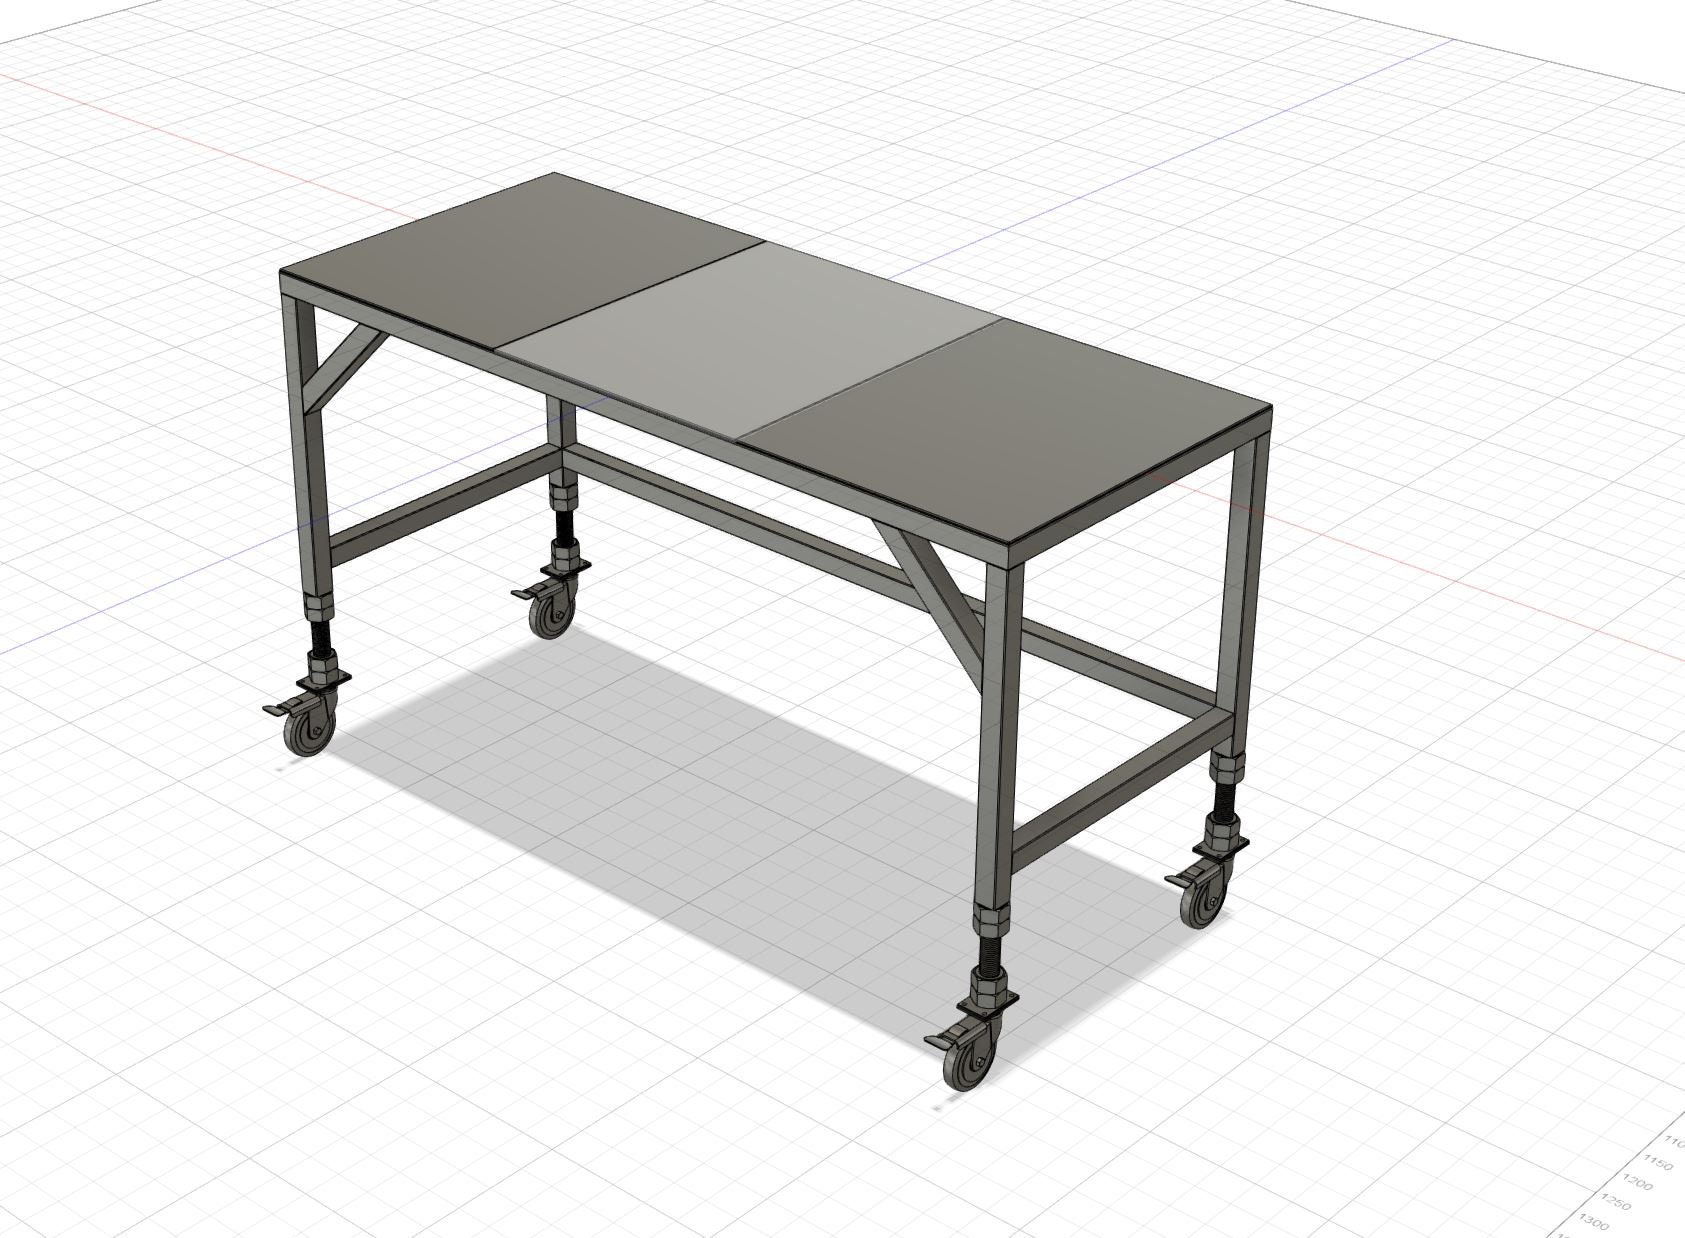 Welding table plans for sale  